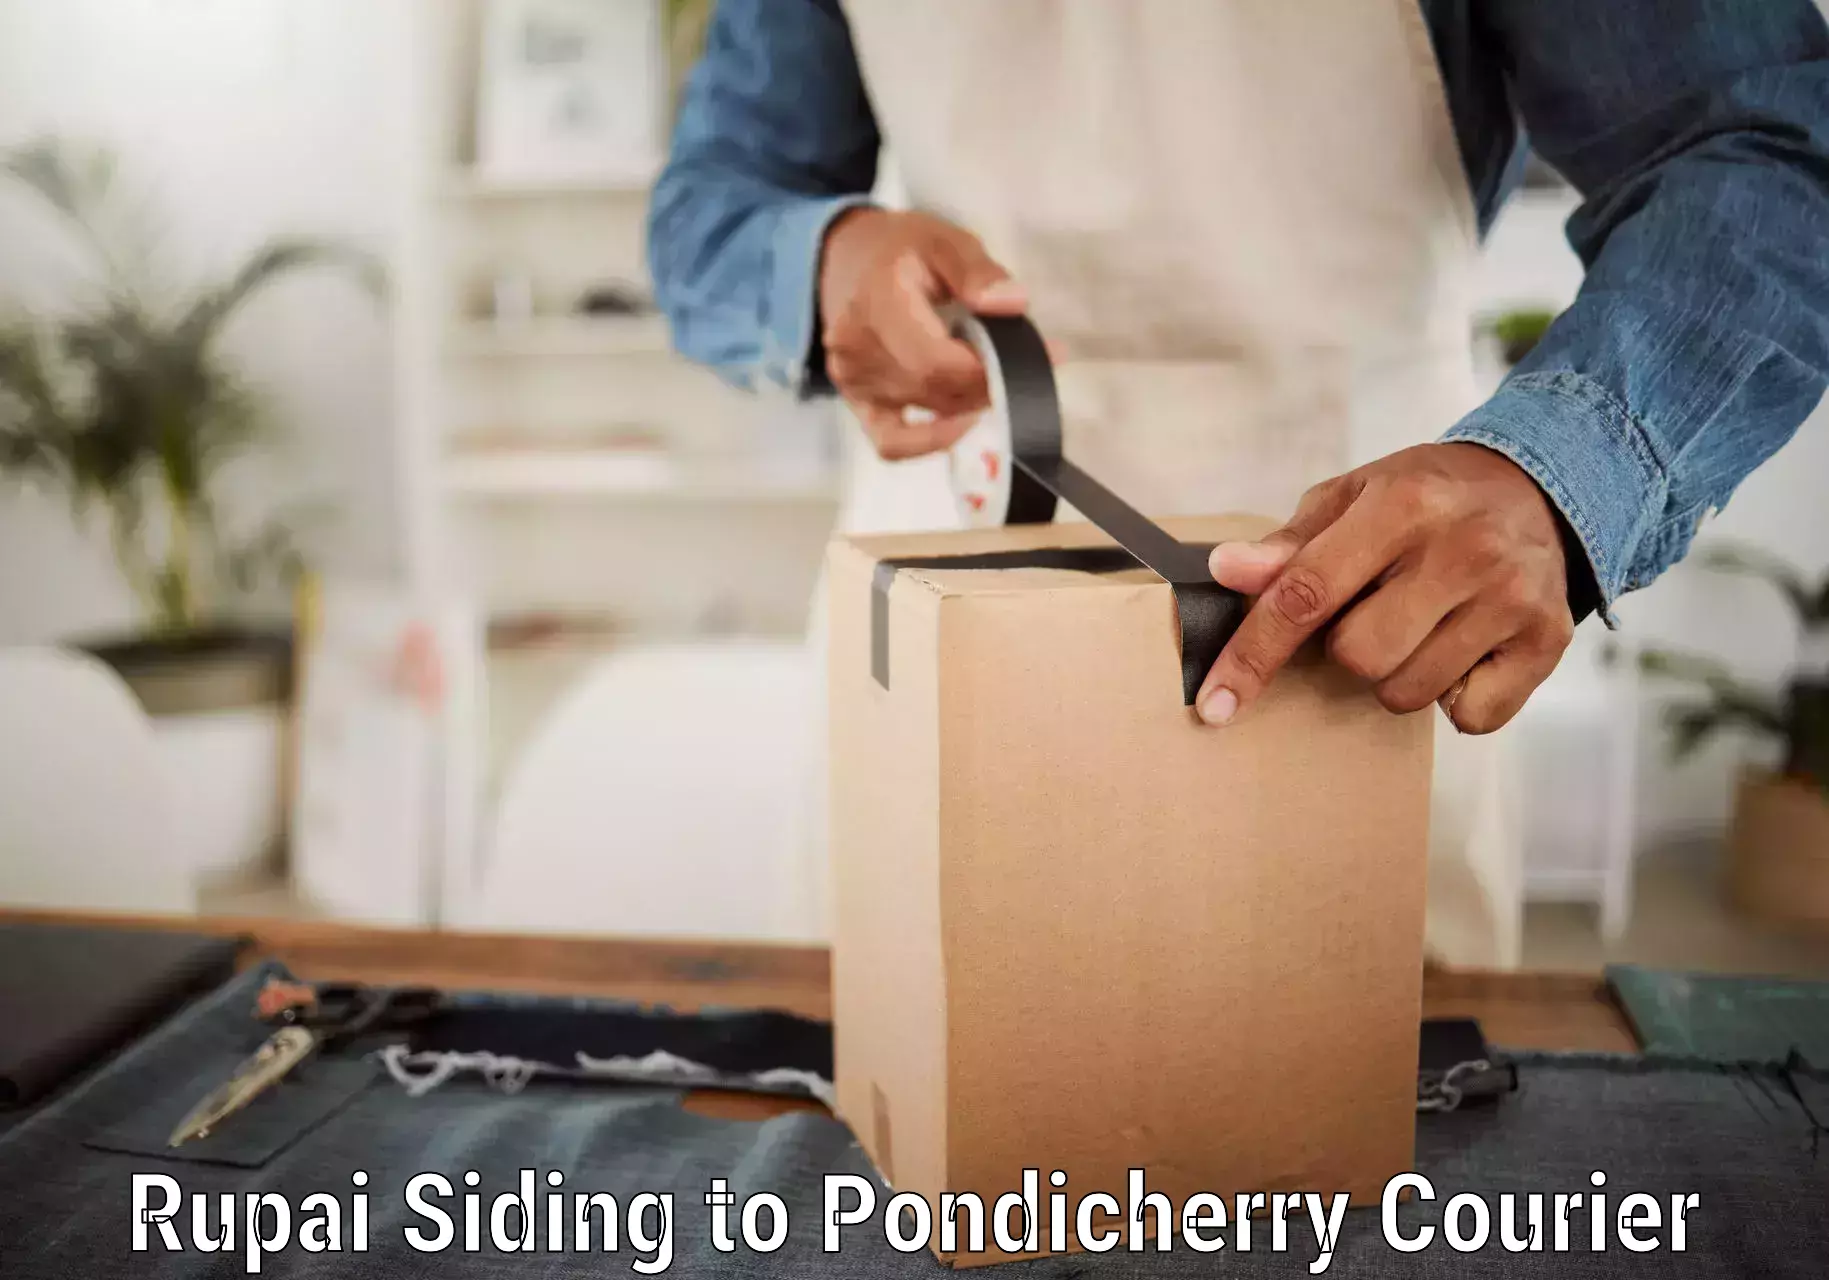 Easy return solutions in Rupai Siding to Pondicherry